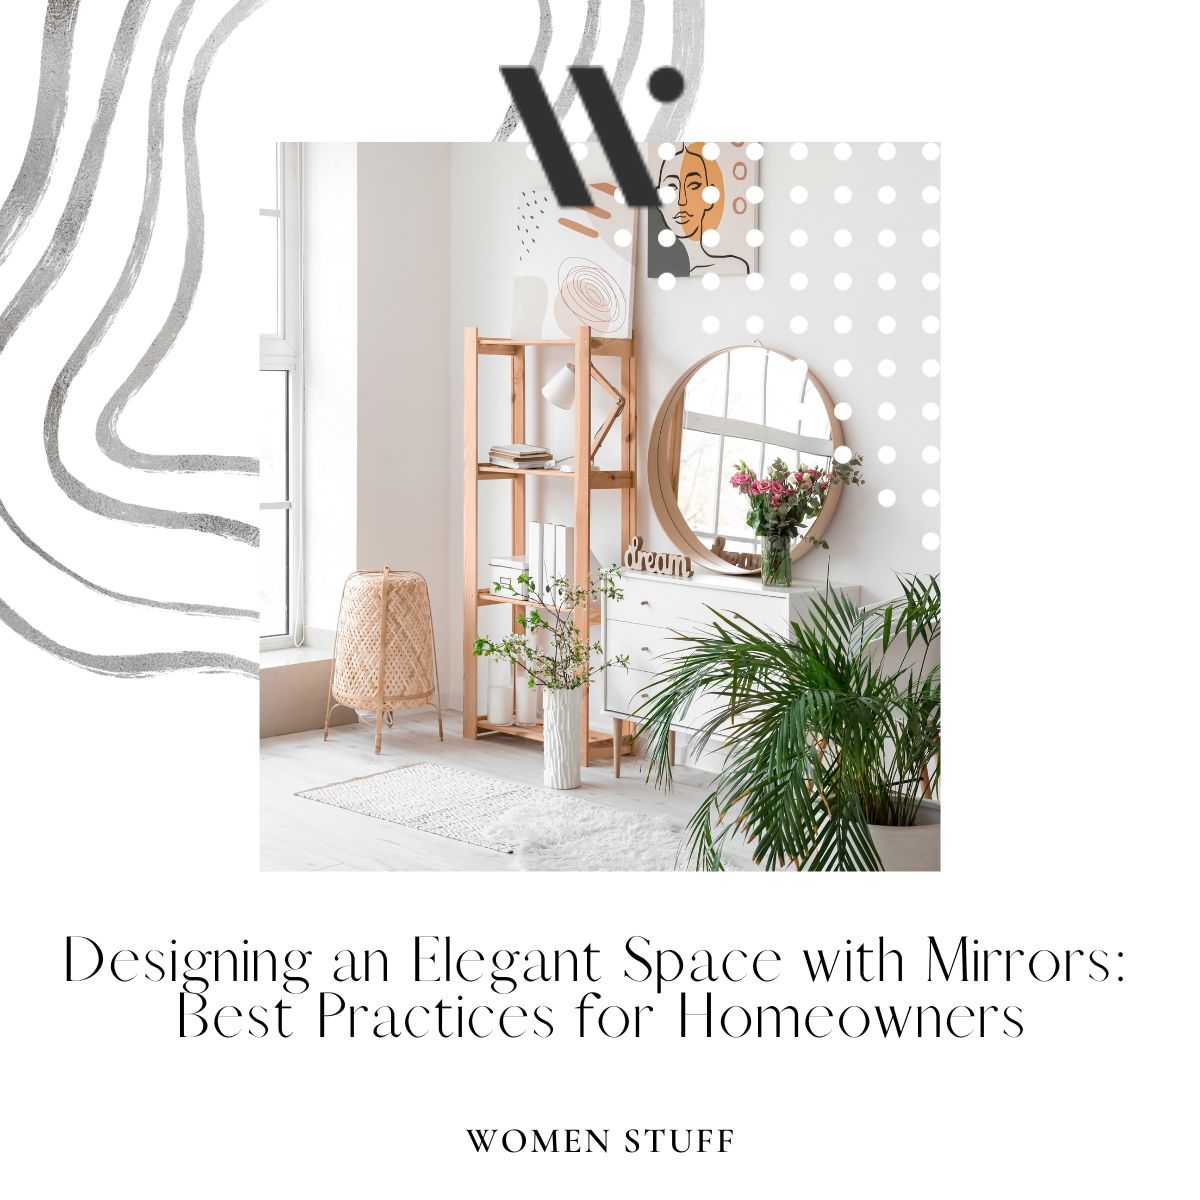 Designing an Elegant Space with Mirrors Best Practices for Homeowners